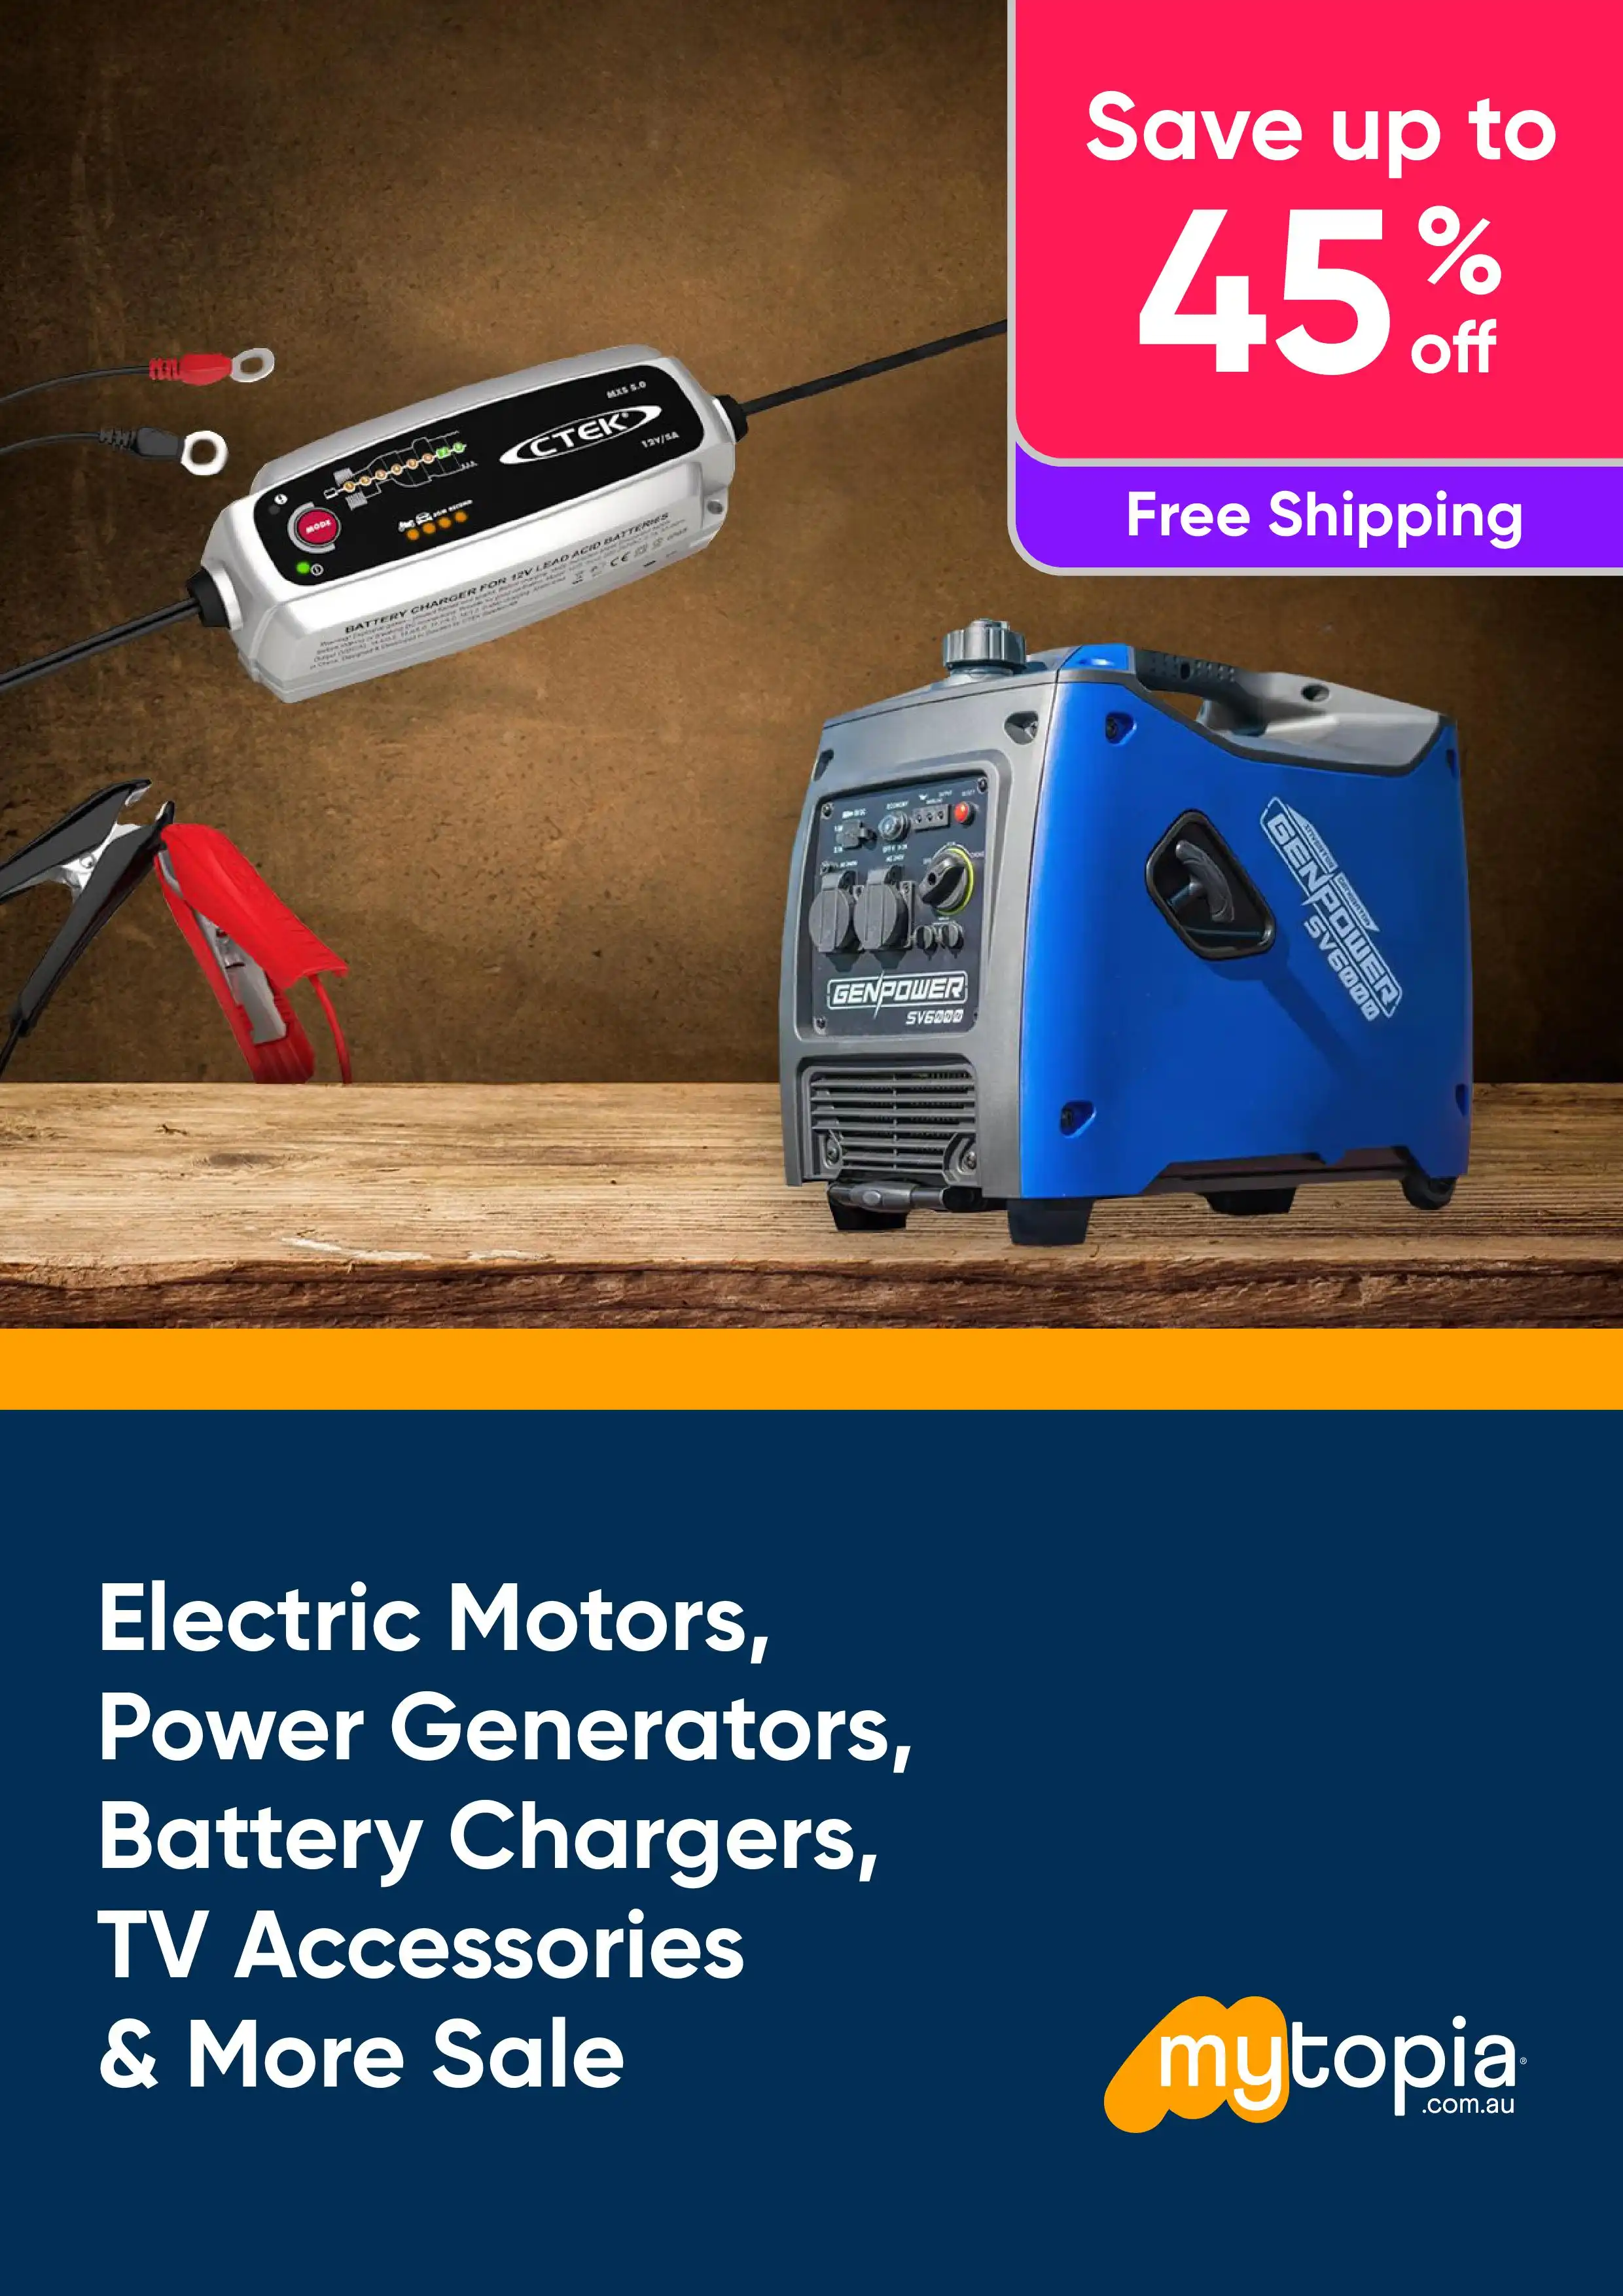 Electric Motors, Power Generators, Battery Chargers, TV Accessories & More Sale - Save Up to 45% Off